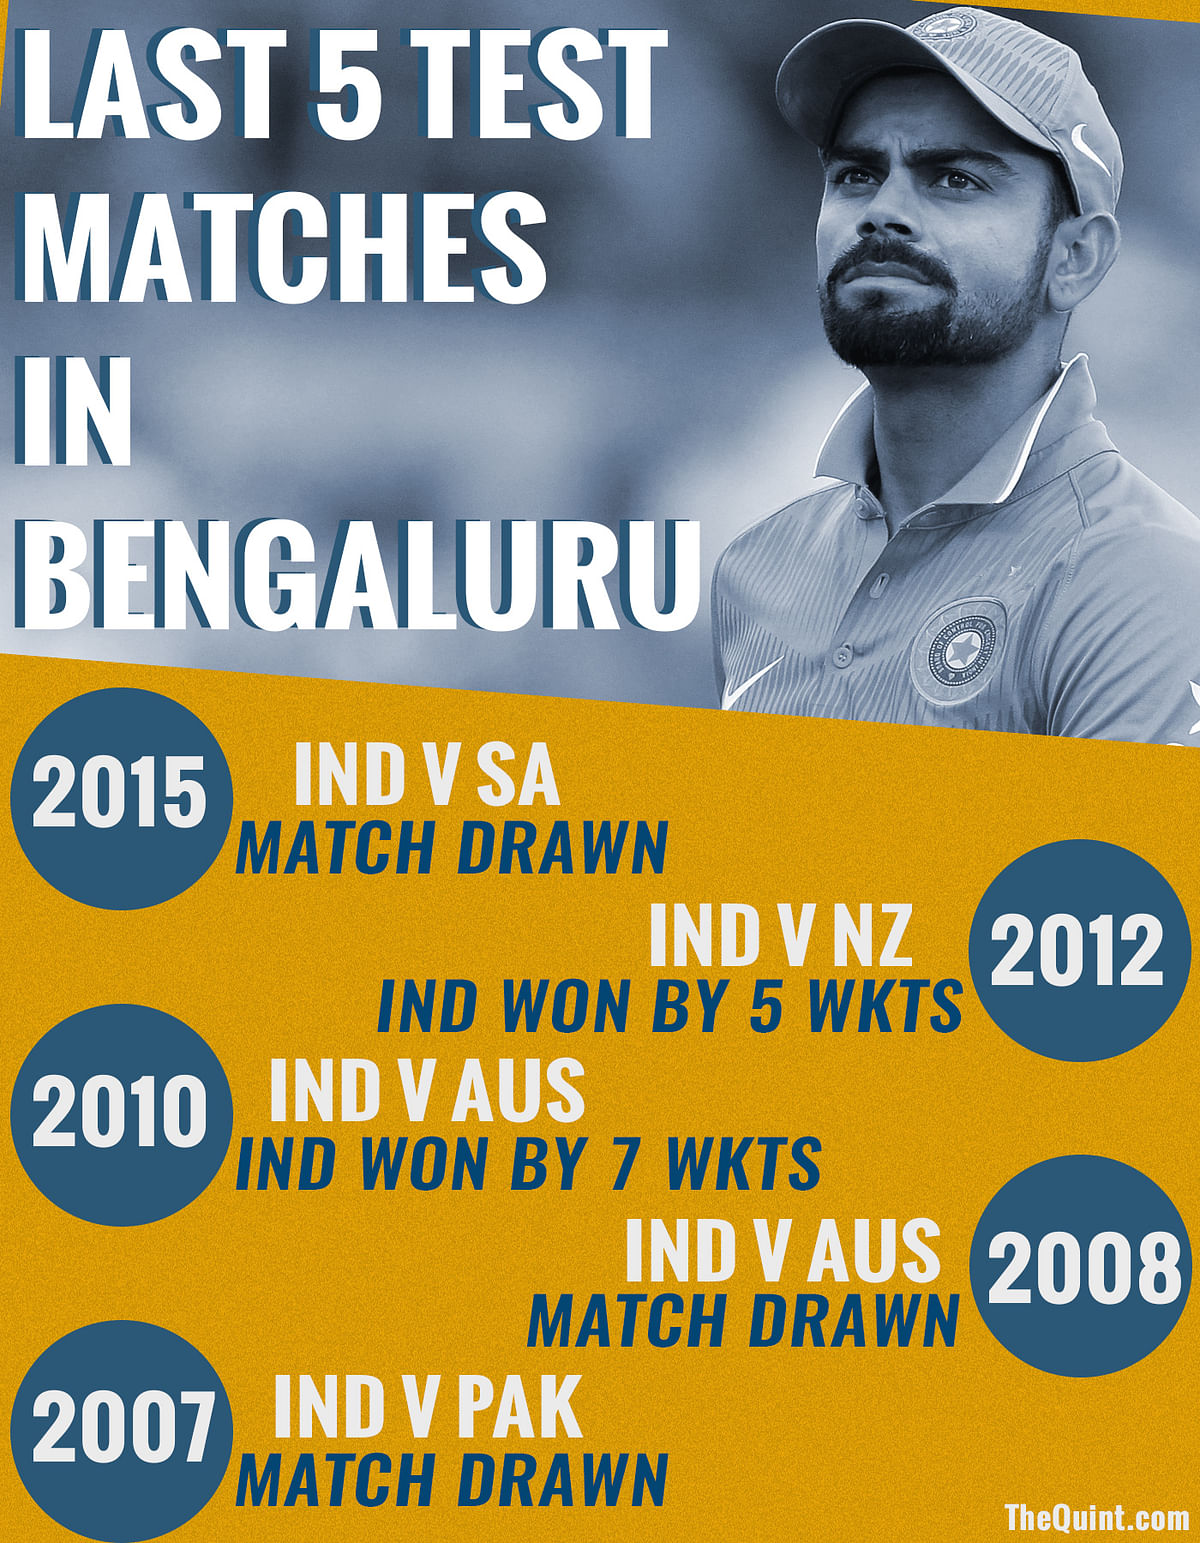 Not one player in the Australian team has played a Test match in Bangalore before.